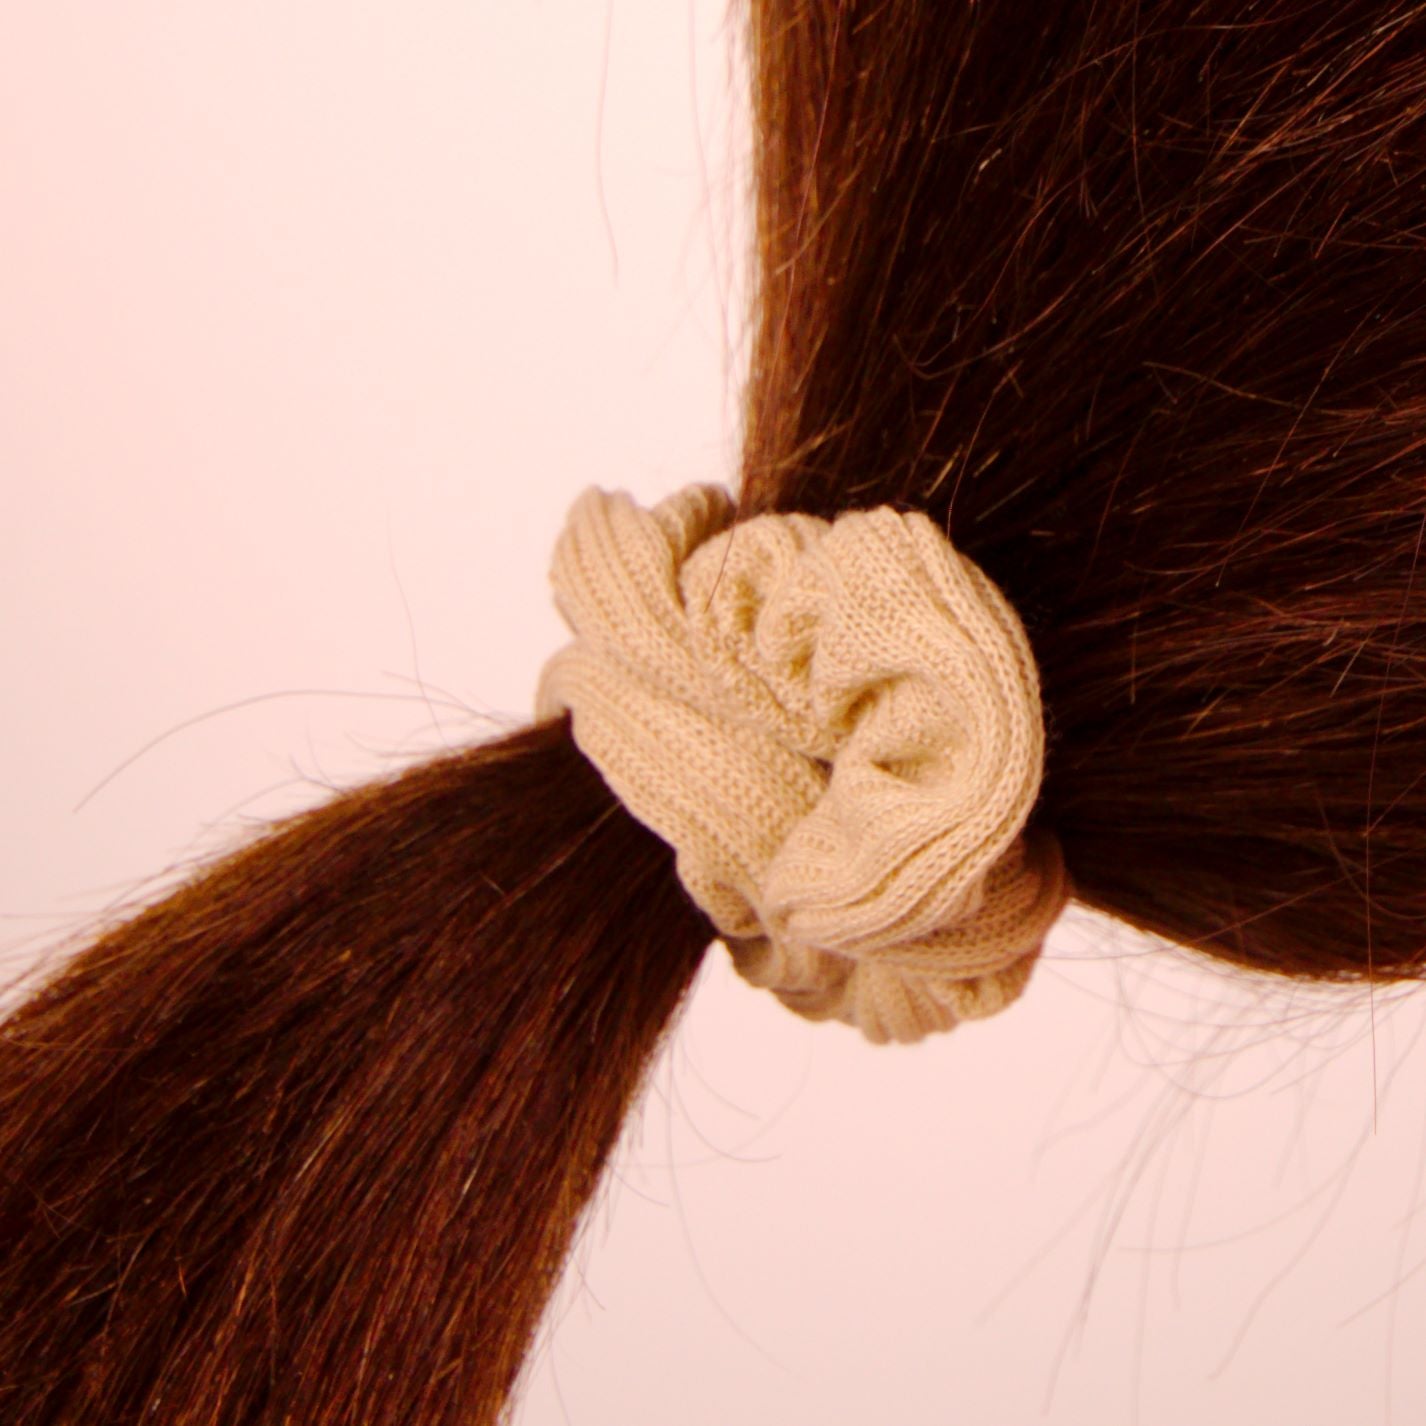 Amelia Beauty, Medium Tan Ribbed Scrunchies, 2.5in Diameter, Gentle on Hair, Strong Hold, No Snag, No Dents or Creases. 10 Pack